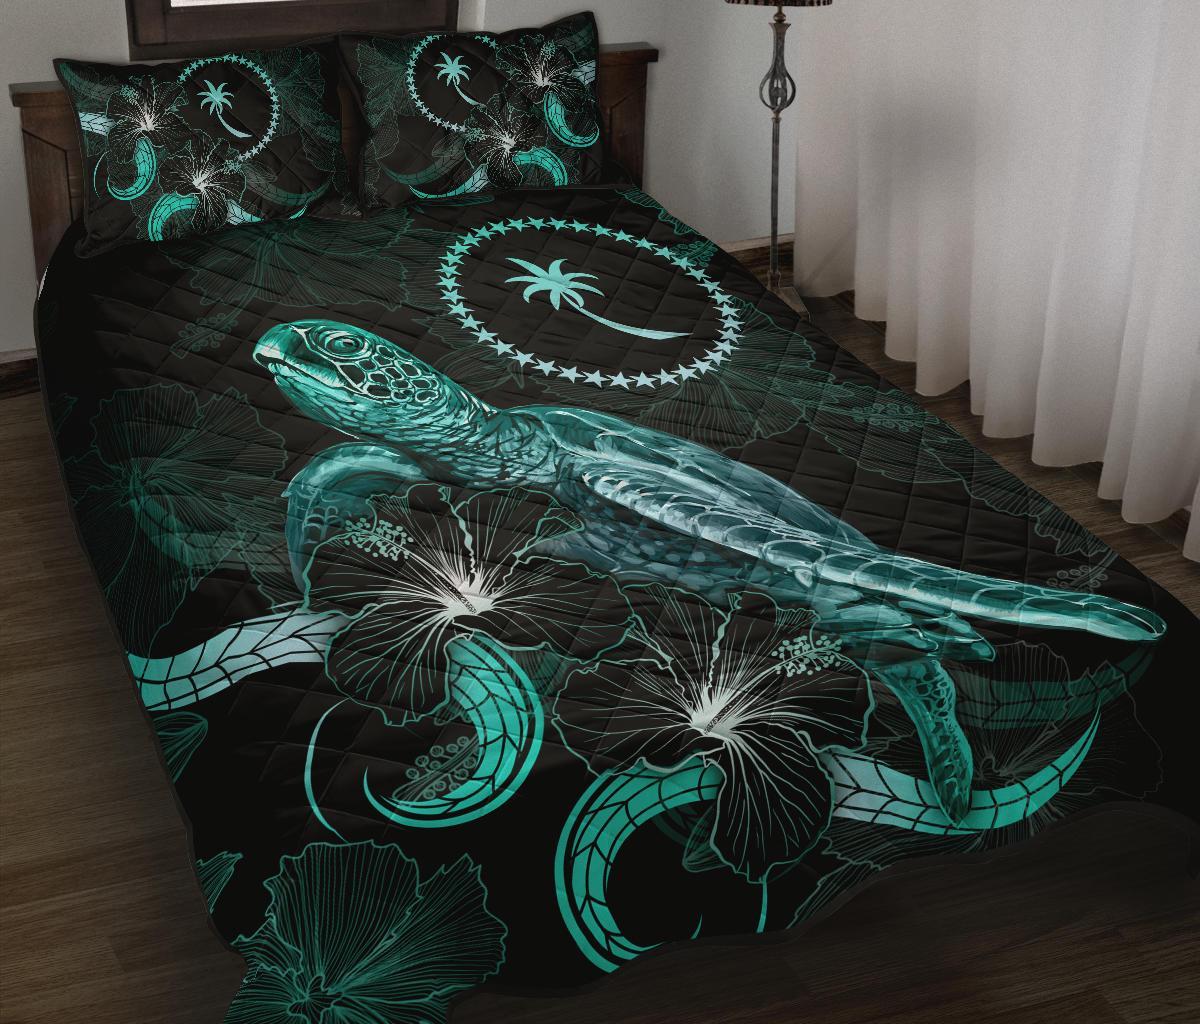 Chuuk Polynesian Quilt Bed Set - Turtle With Blooming Hibiscus Turquoise Turquoise - Polynesian Pride